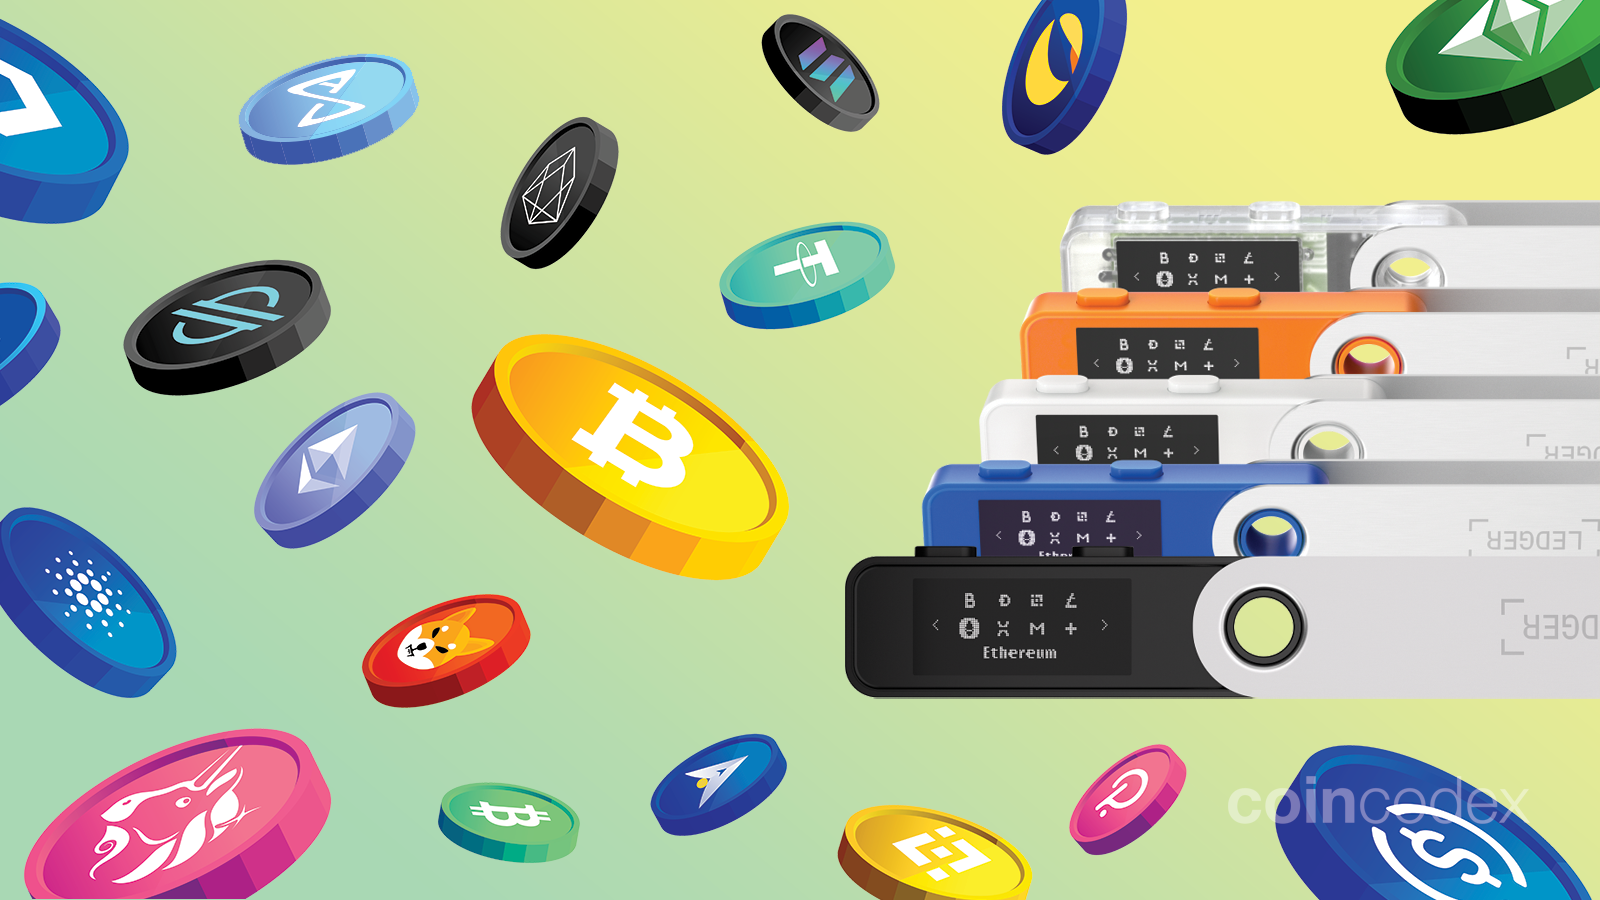 Ledger Nano S Supported Coins ()